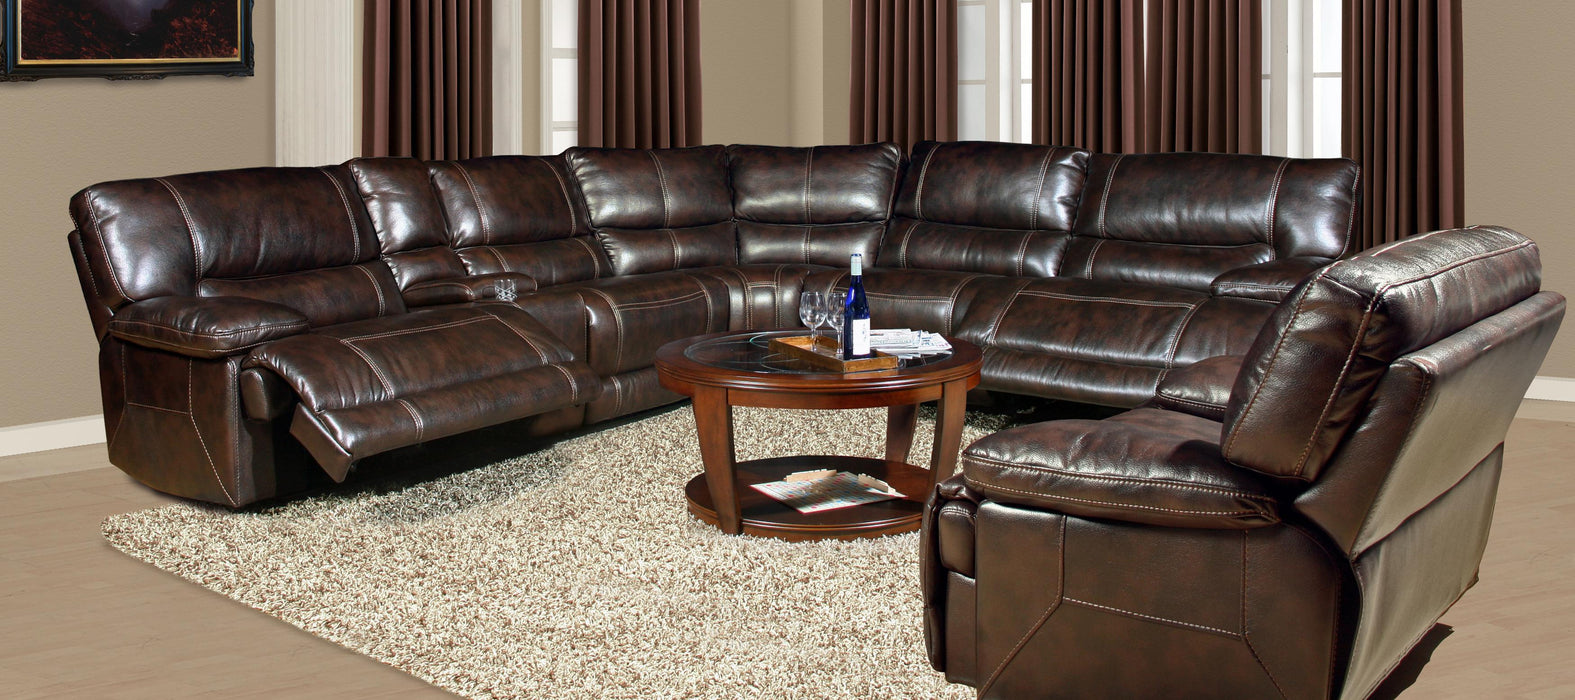 Parker House Pegasus 6pc Power Recliner Sectional in Nutmeg